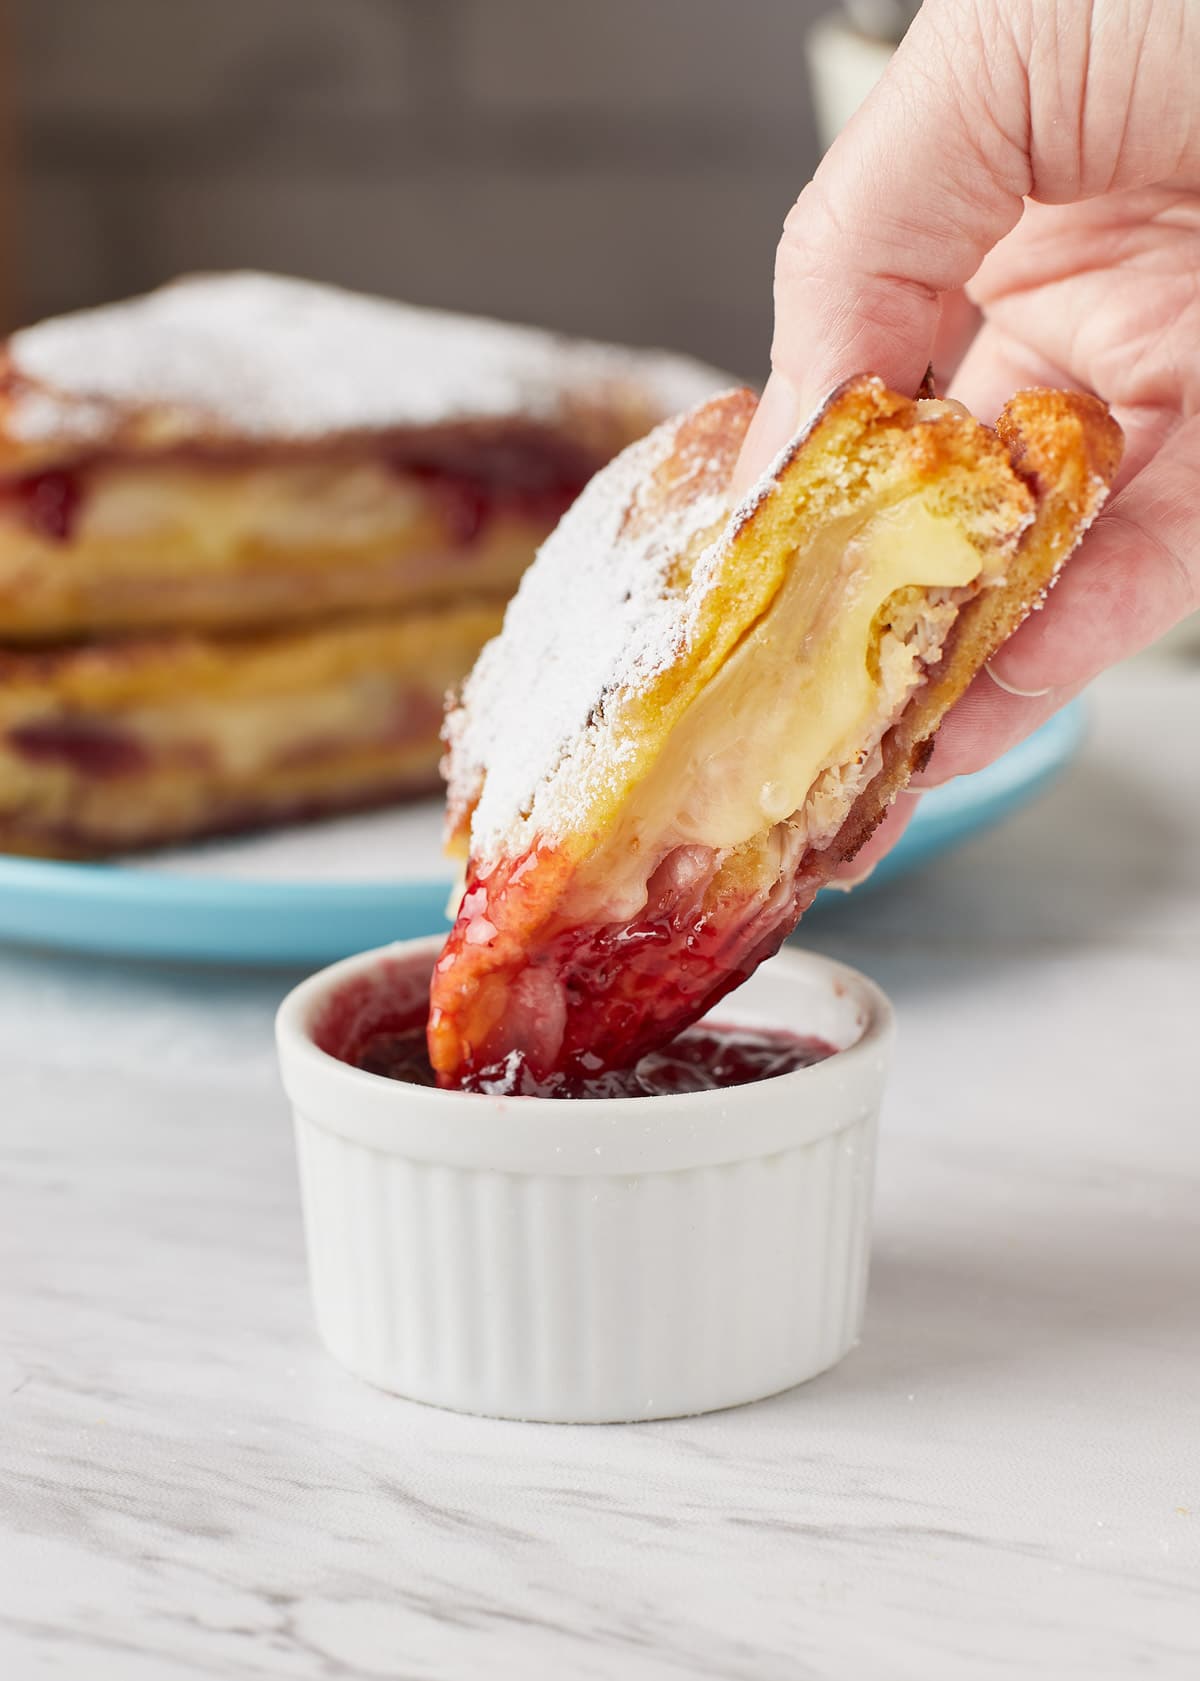 dipping half of a monte cristo sandwich into a bowl of jelly